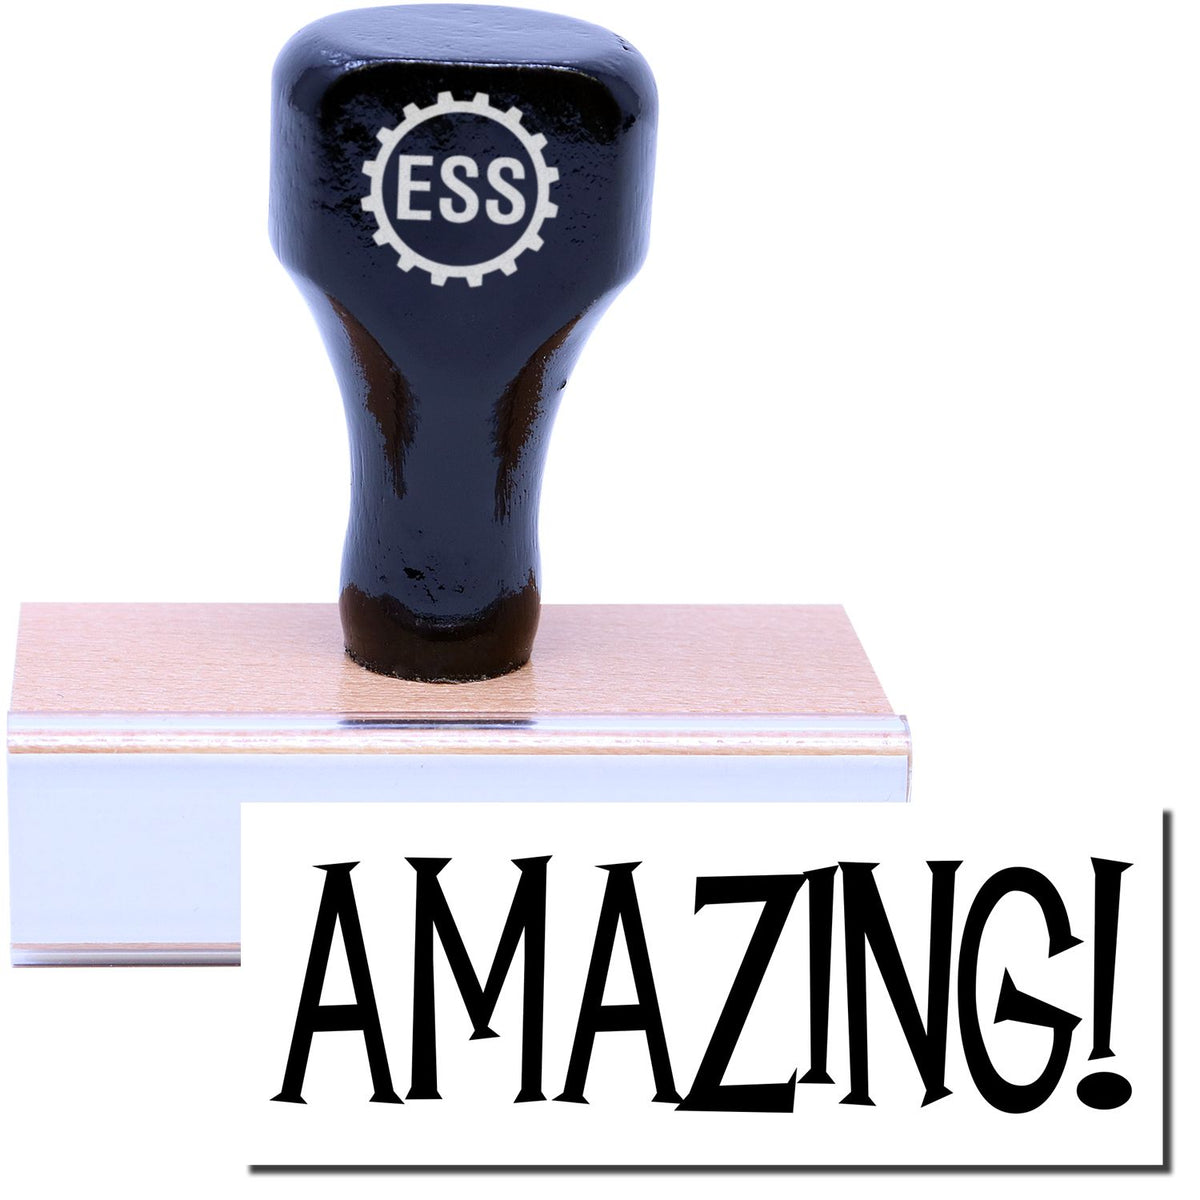 A stock office rubber stamp with a stamped image showing how the text &quot;AMAZING!&quot; is displayed after stamping.